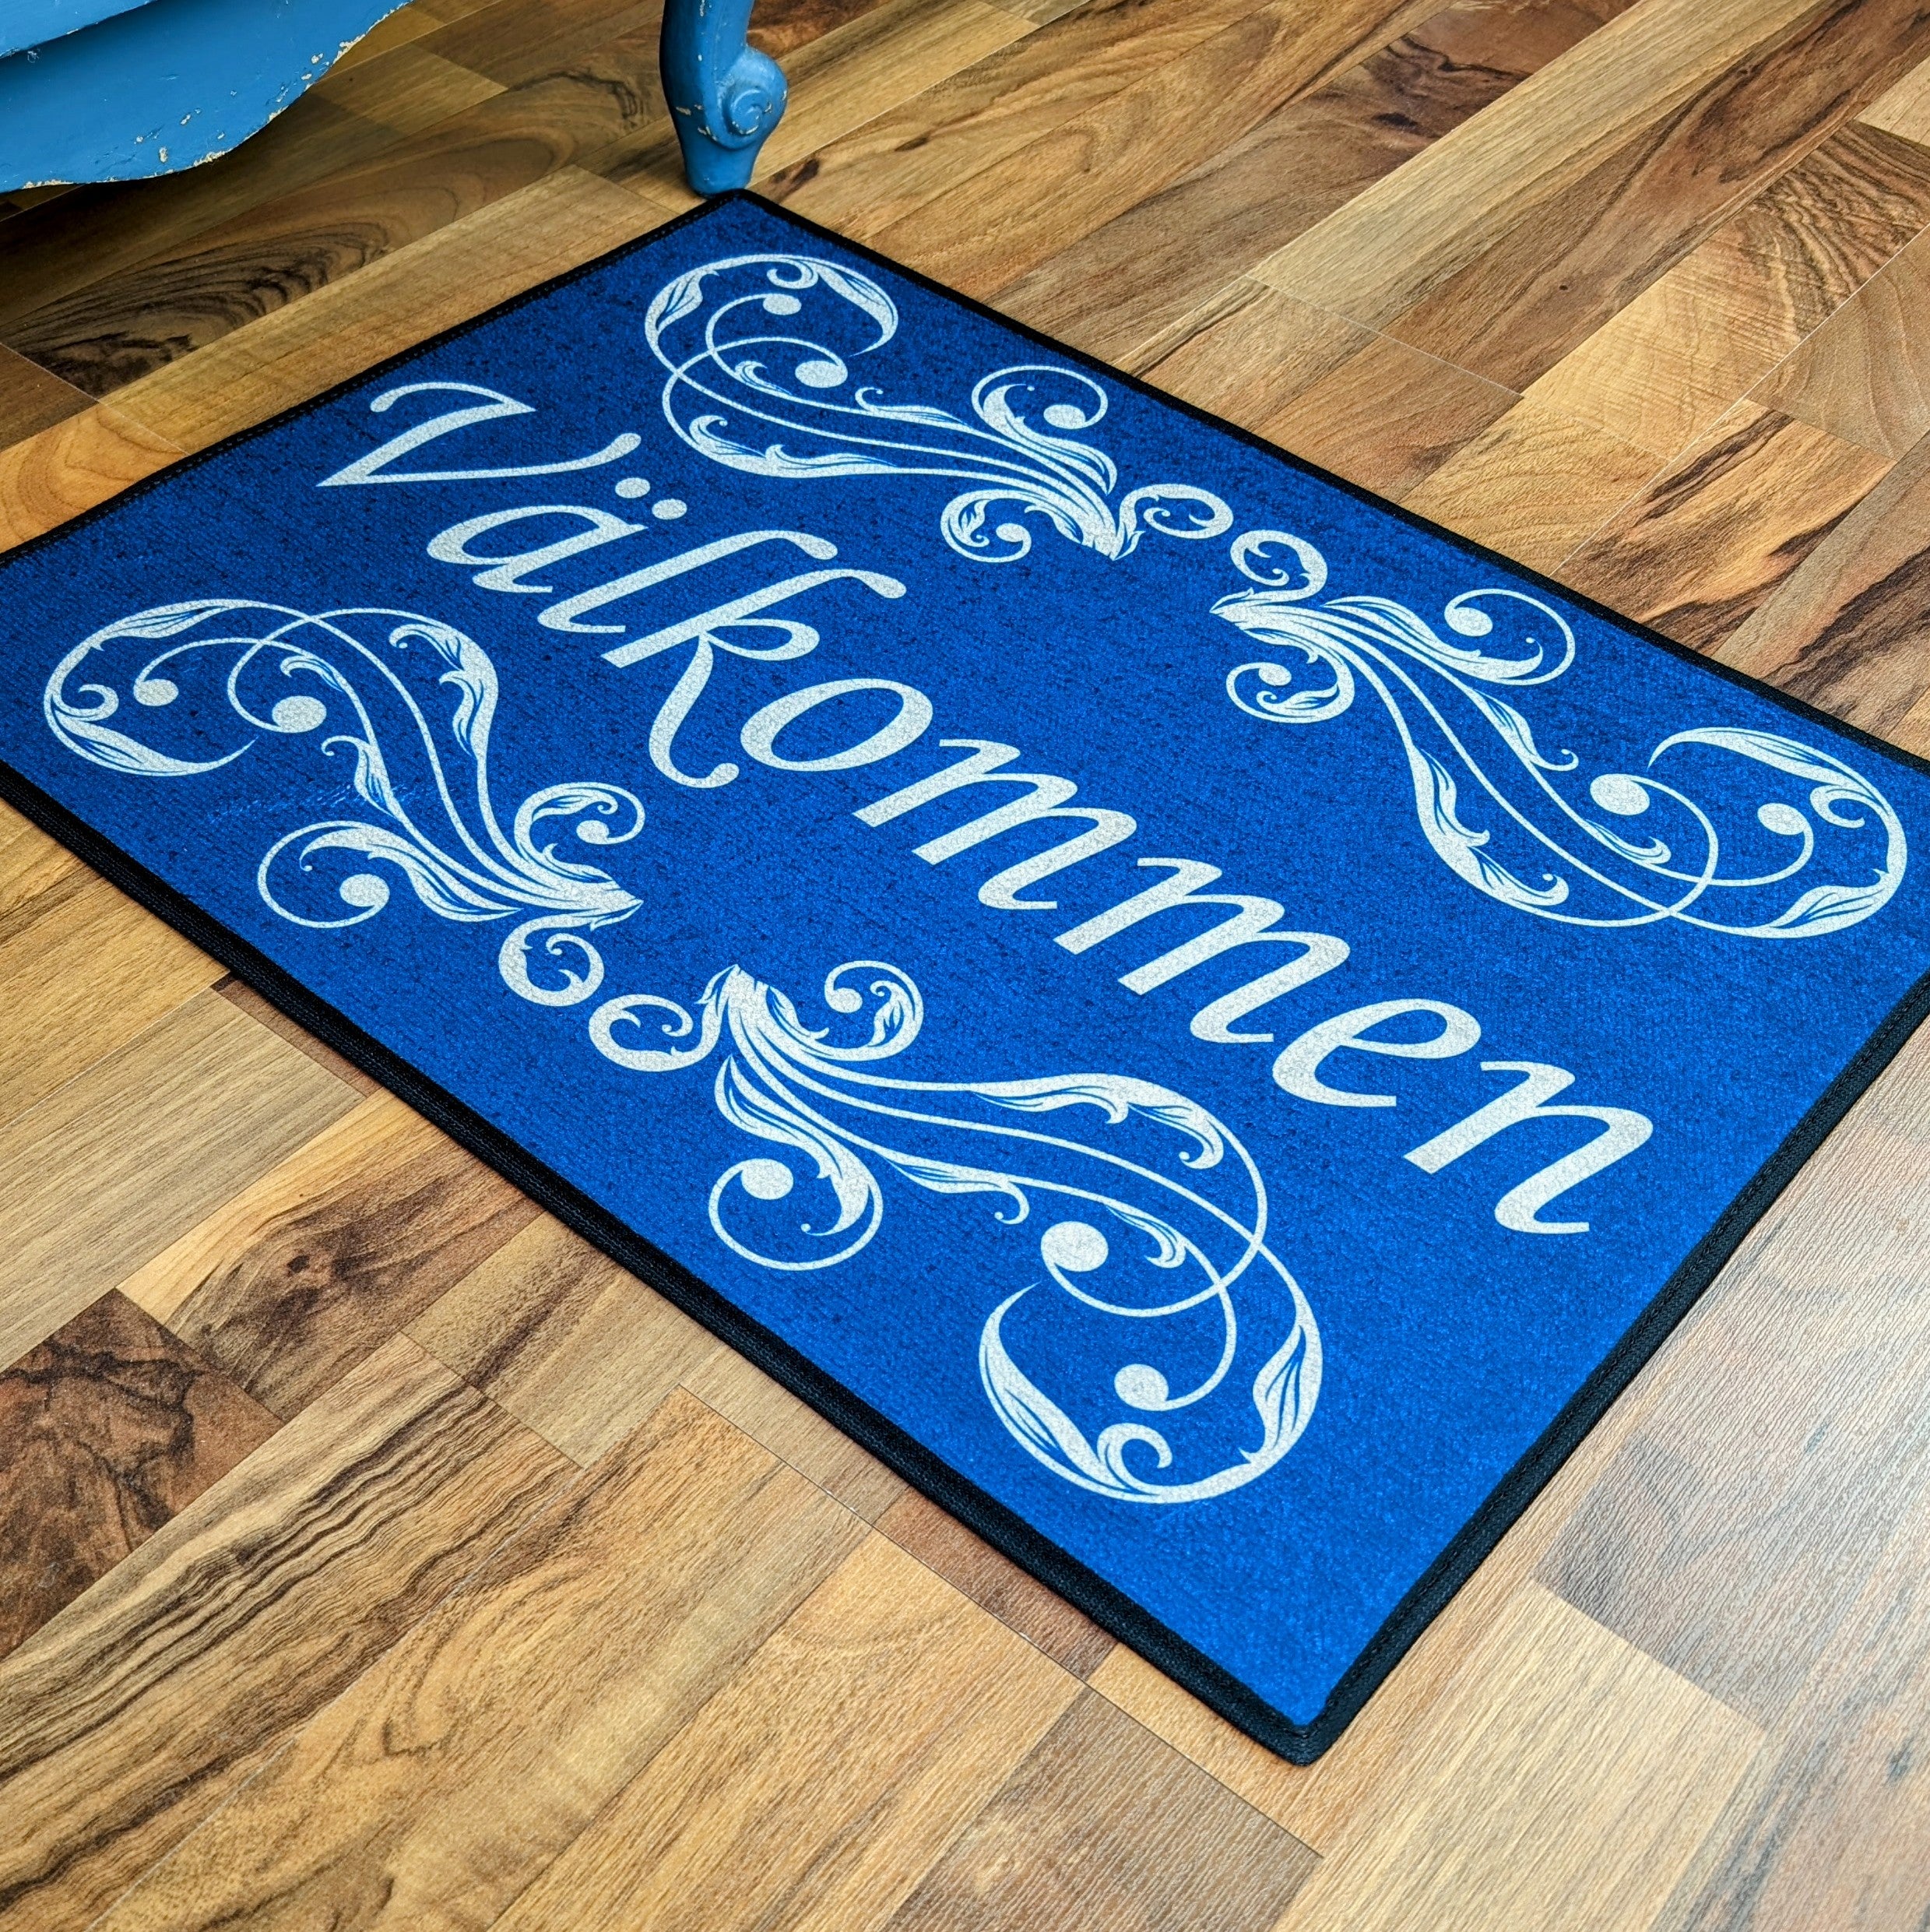 Rug: Valkommen Blue Scroll Welcome in Swedish